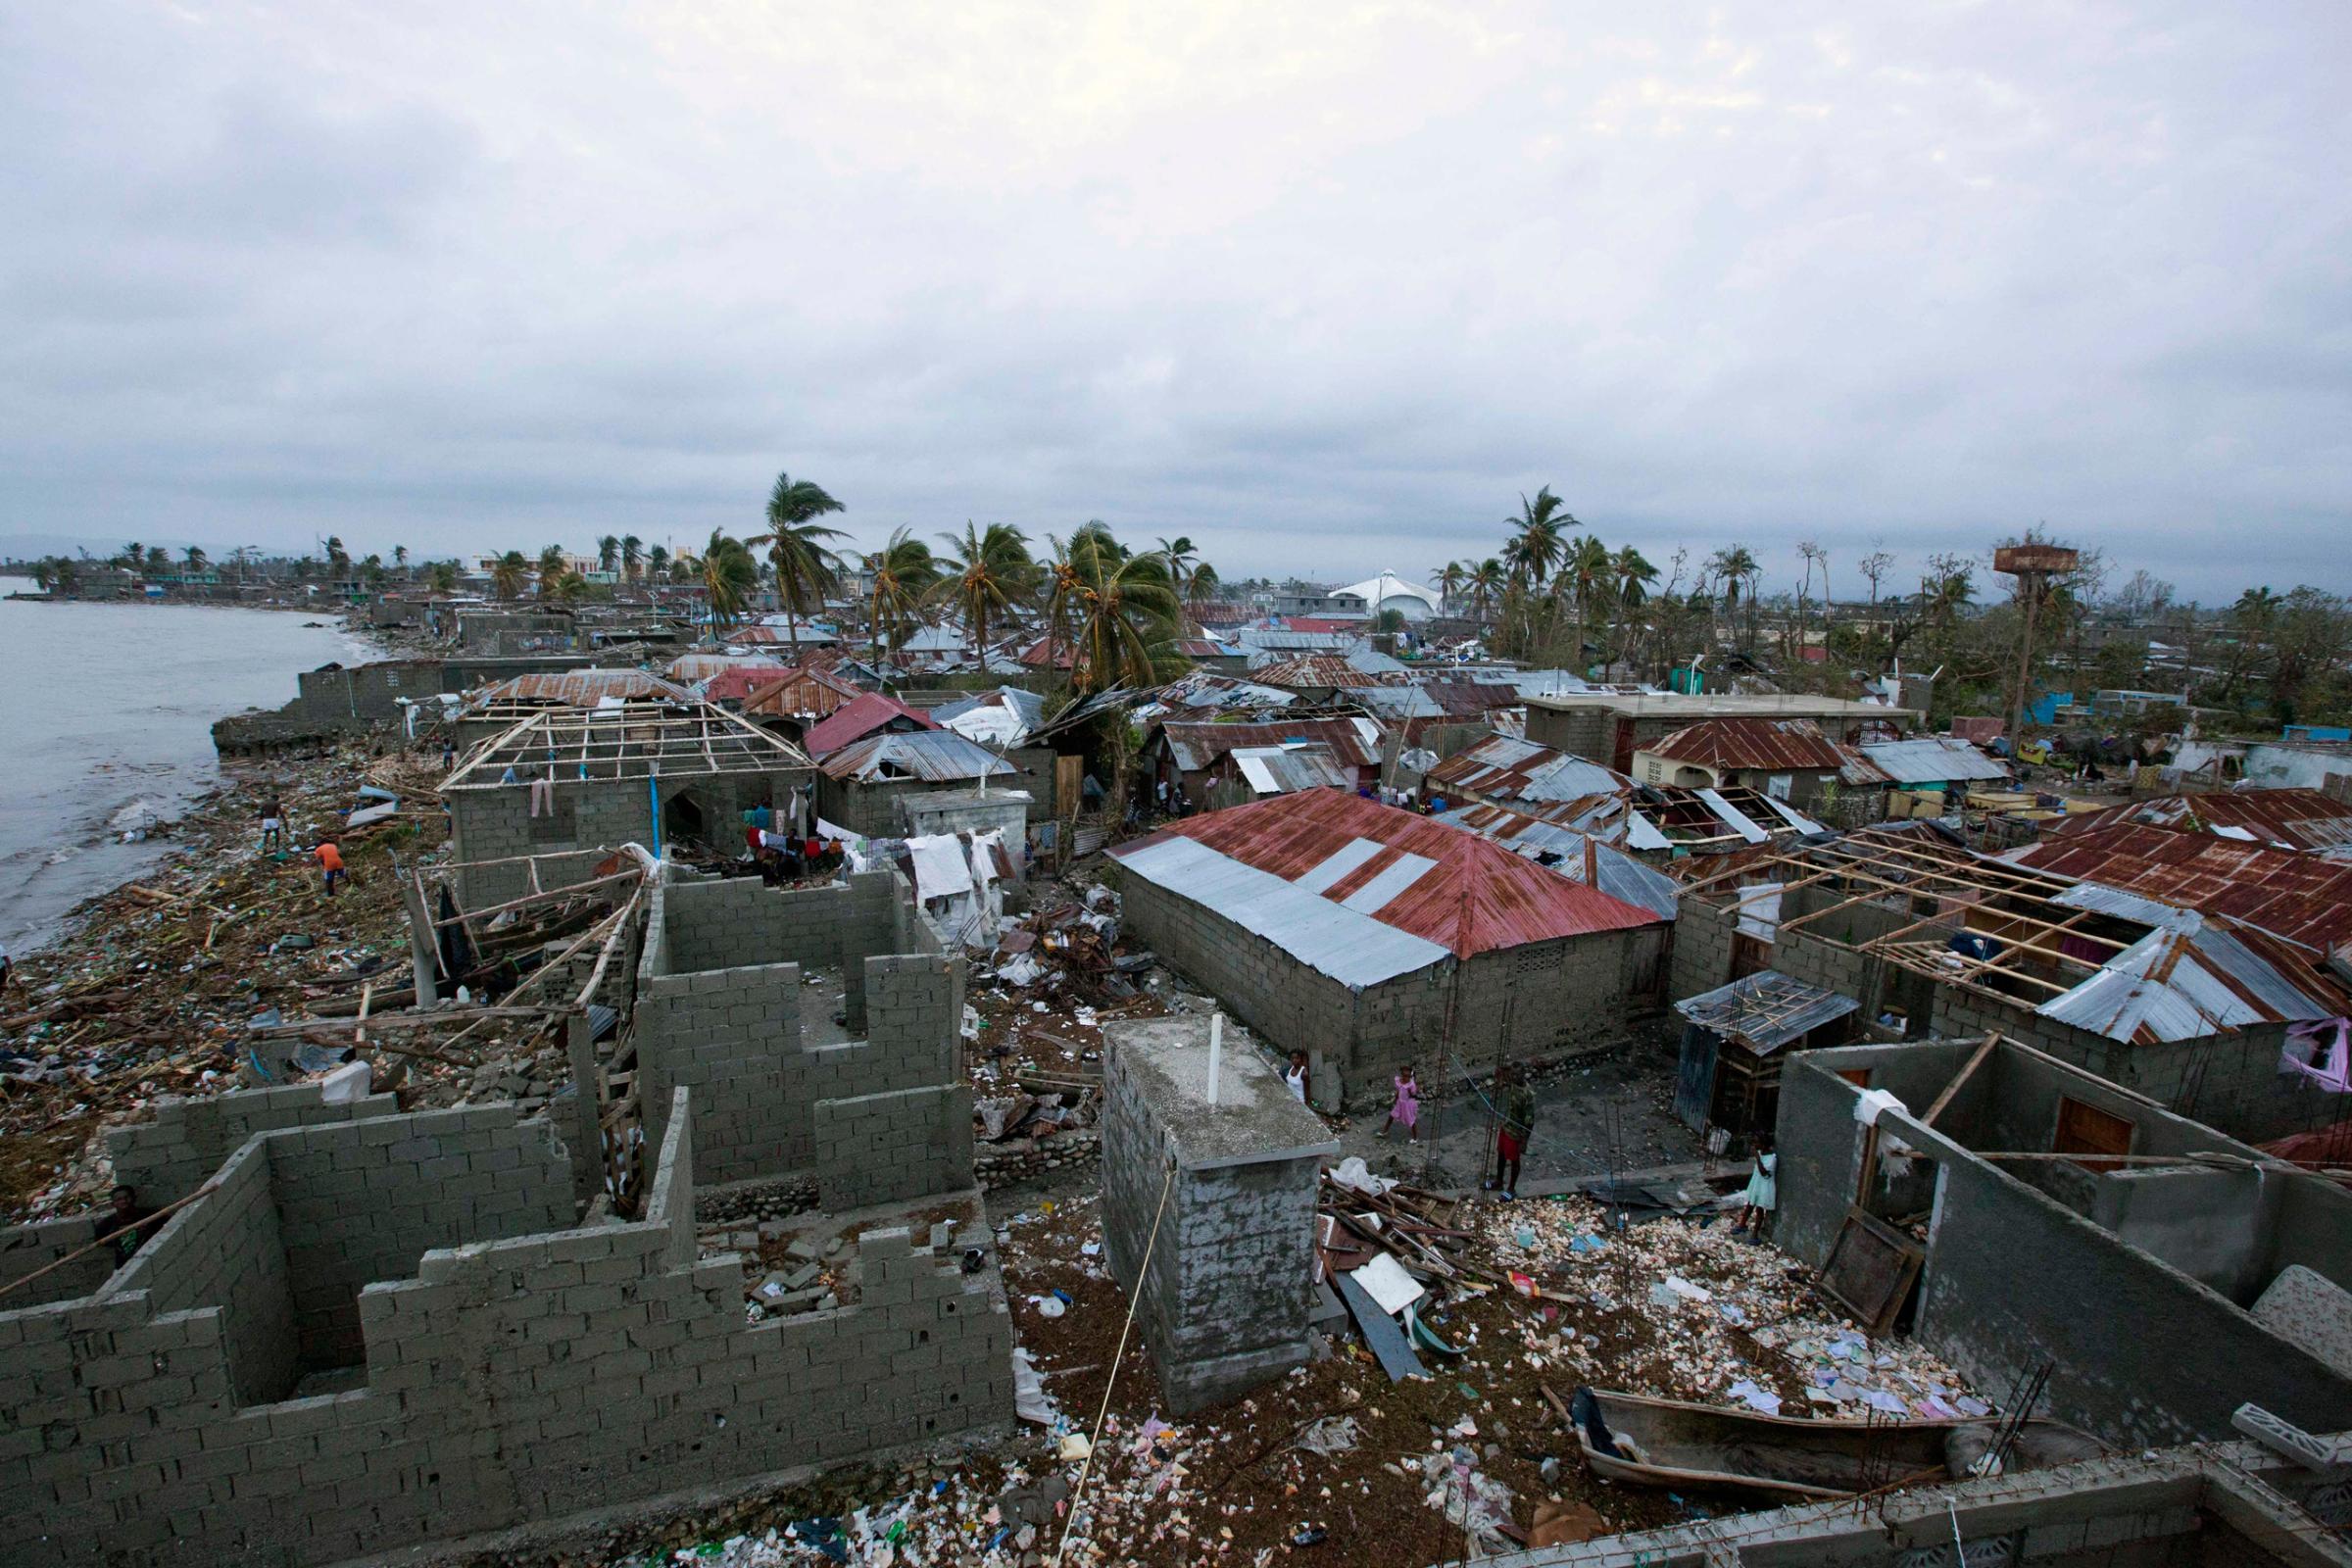 Homes lay in ruins after the passing of Hurricane Matthew in Les Cayes, Haiti, Thursday, Oct. 6, 2016. Two days after the storm rampaged across the country's remote southwestern peninsula, authorities and aid workers still lack a clear picture of what they fear is the country's biggest disaster in years. (AP Photo/Dieu Nalio Chery)